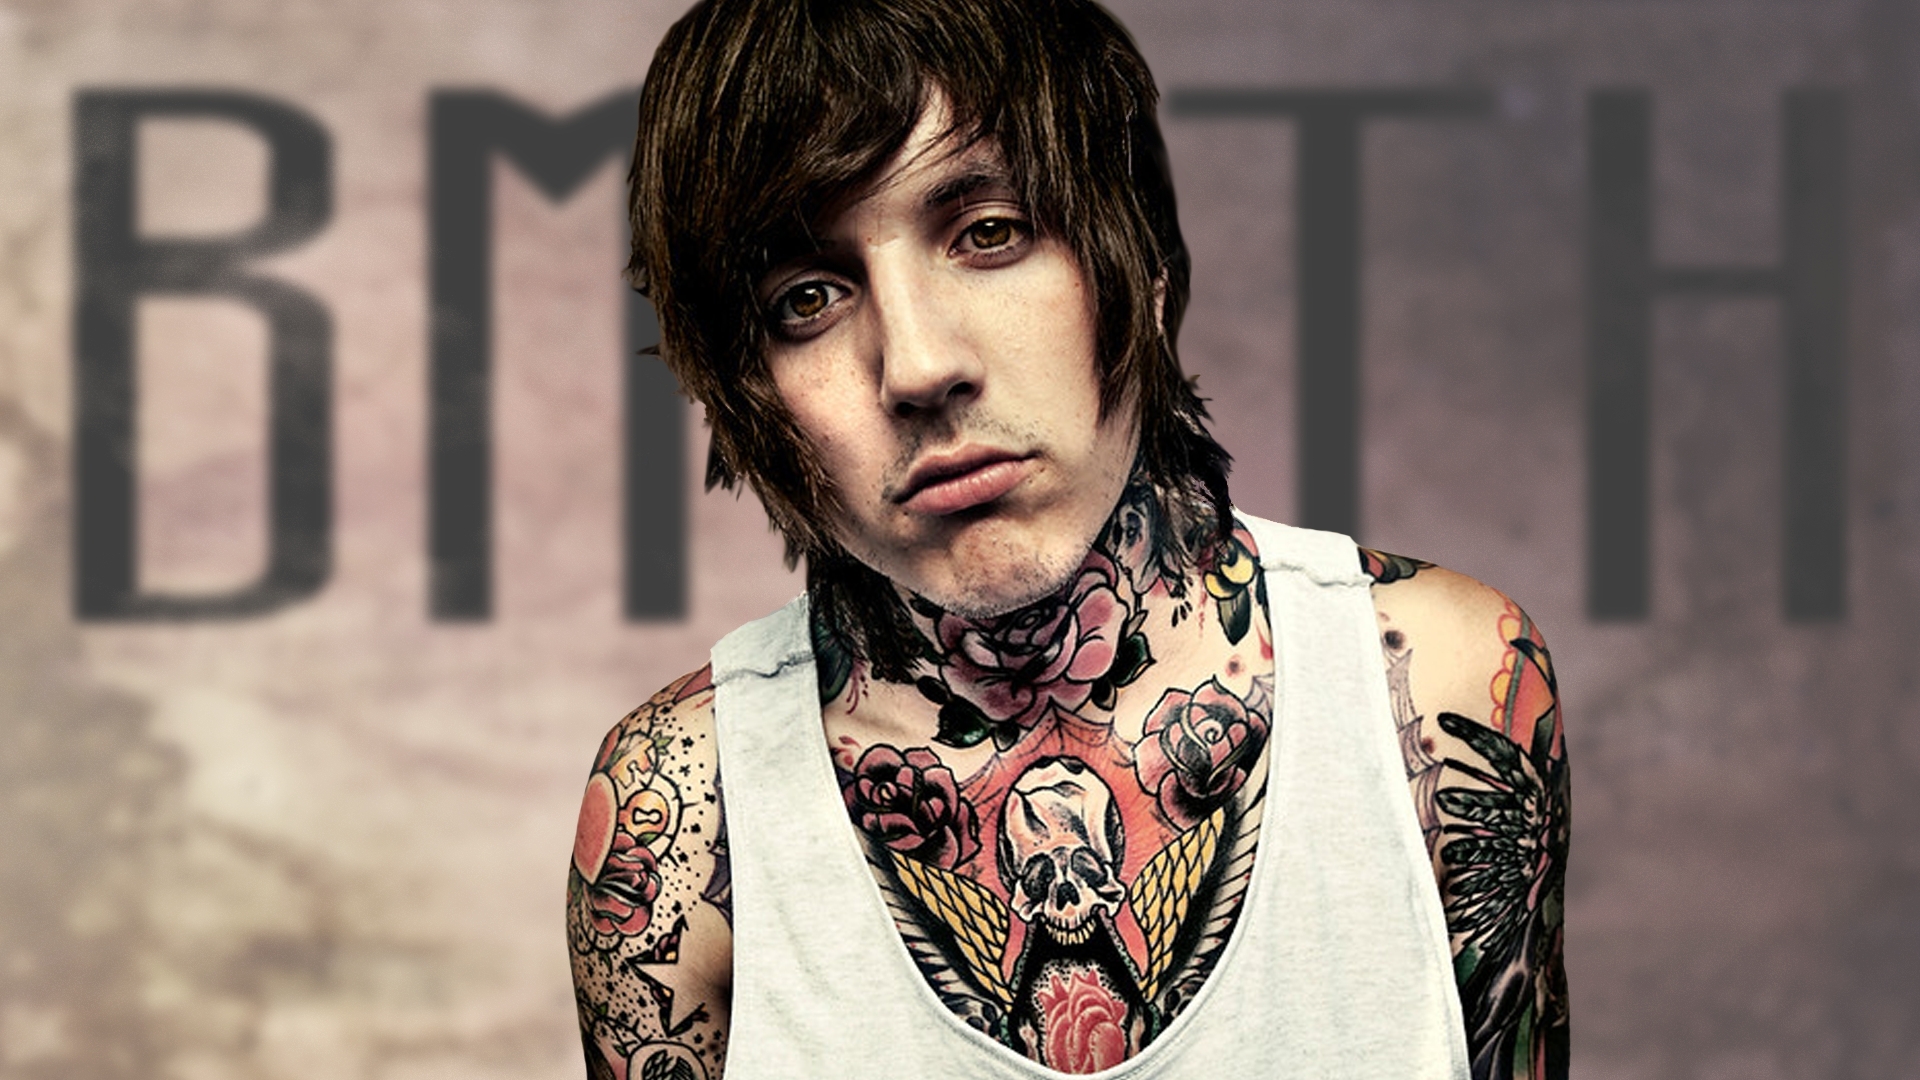 Download Wallpapers, Download tattoos bring me the horizon oliver